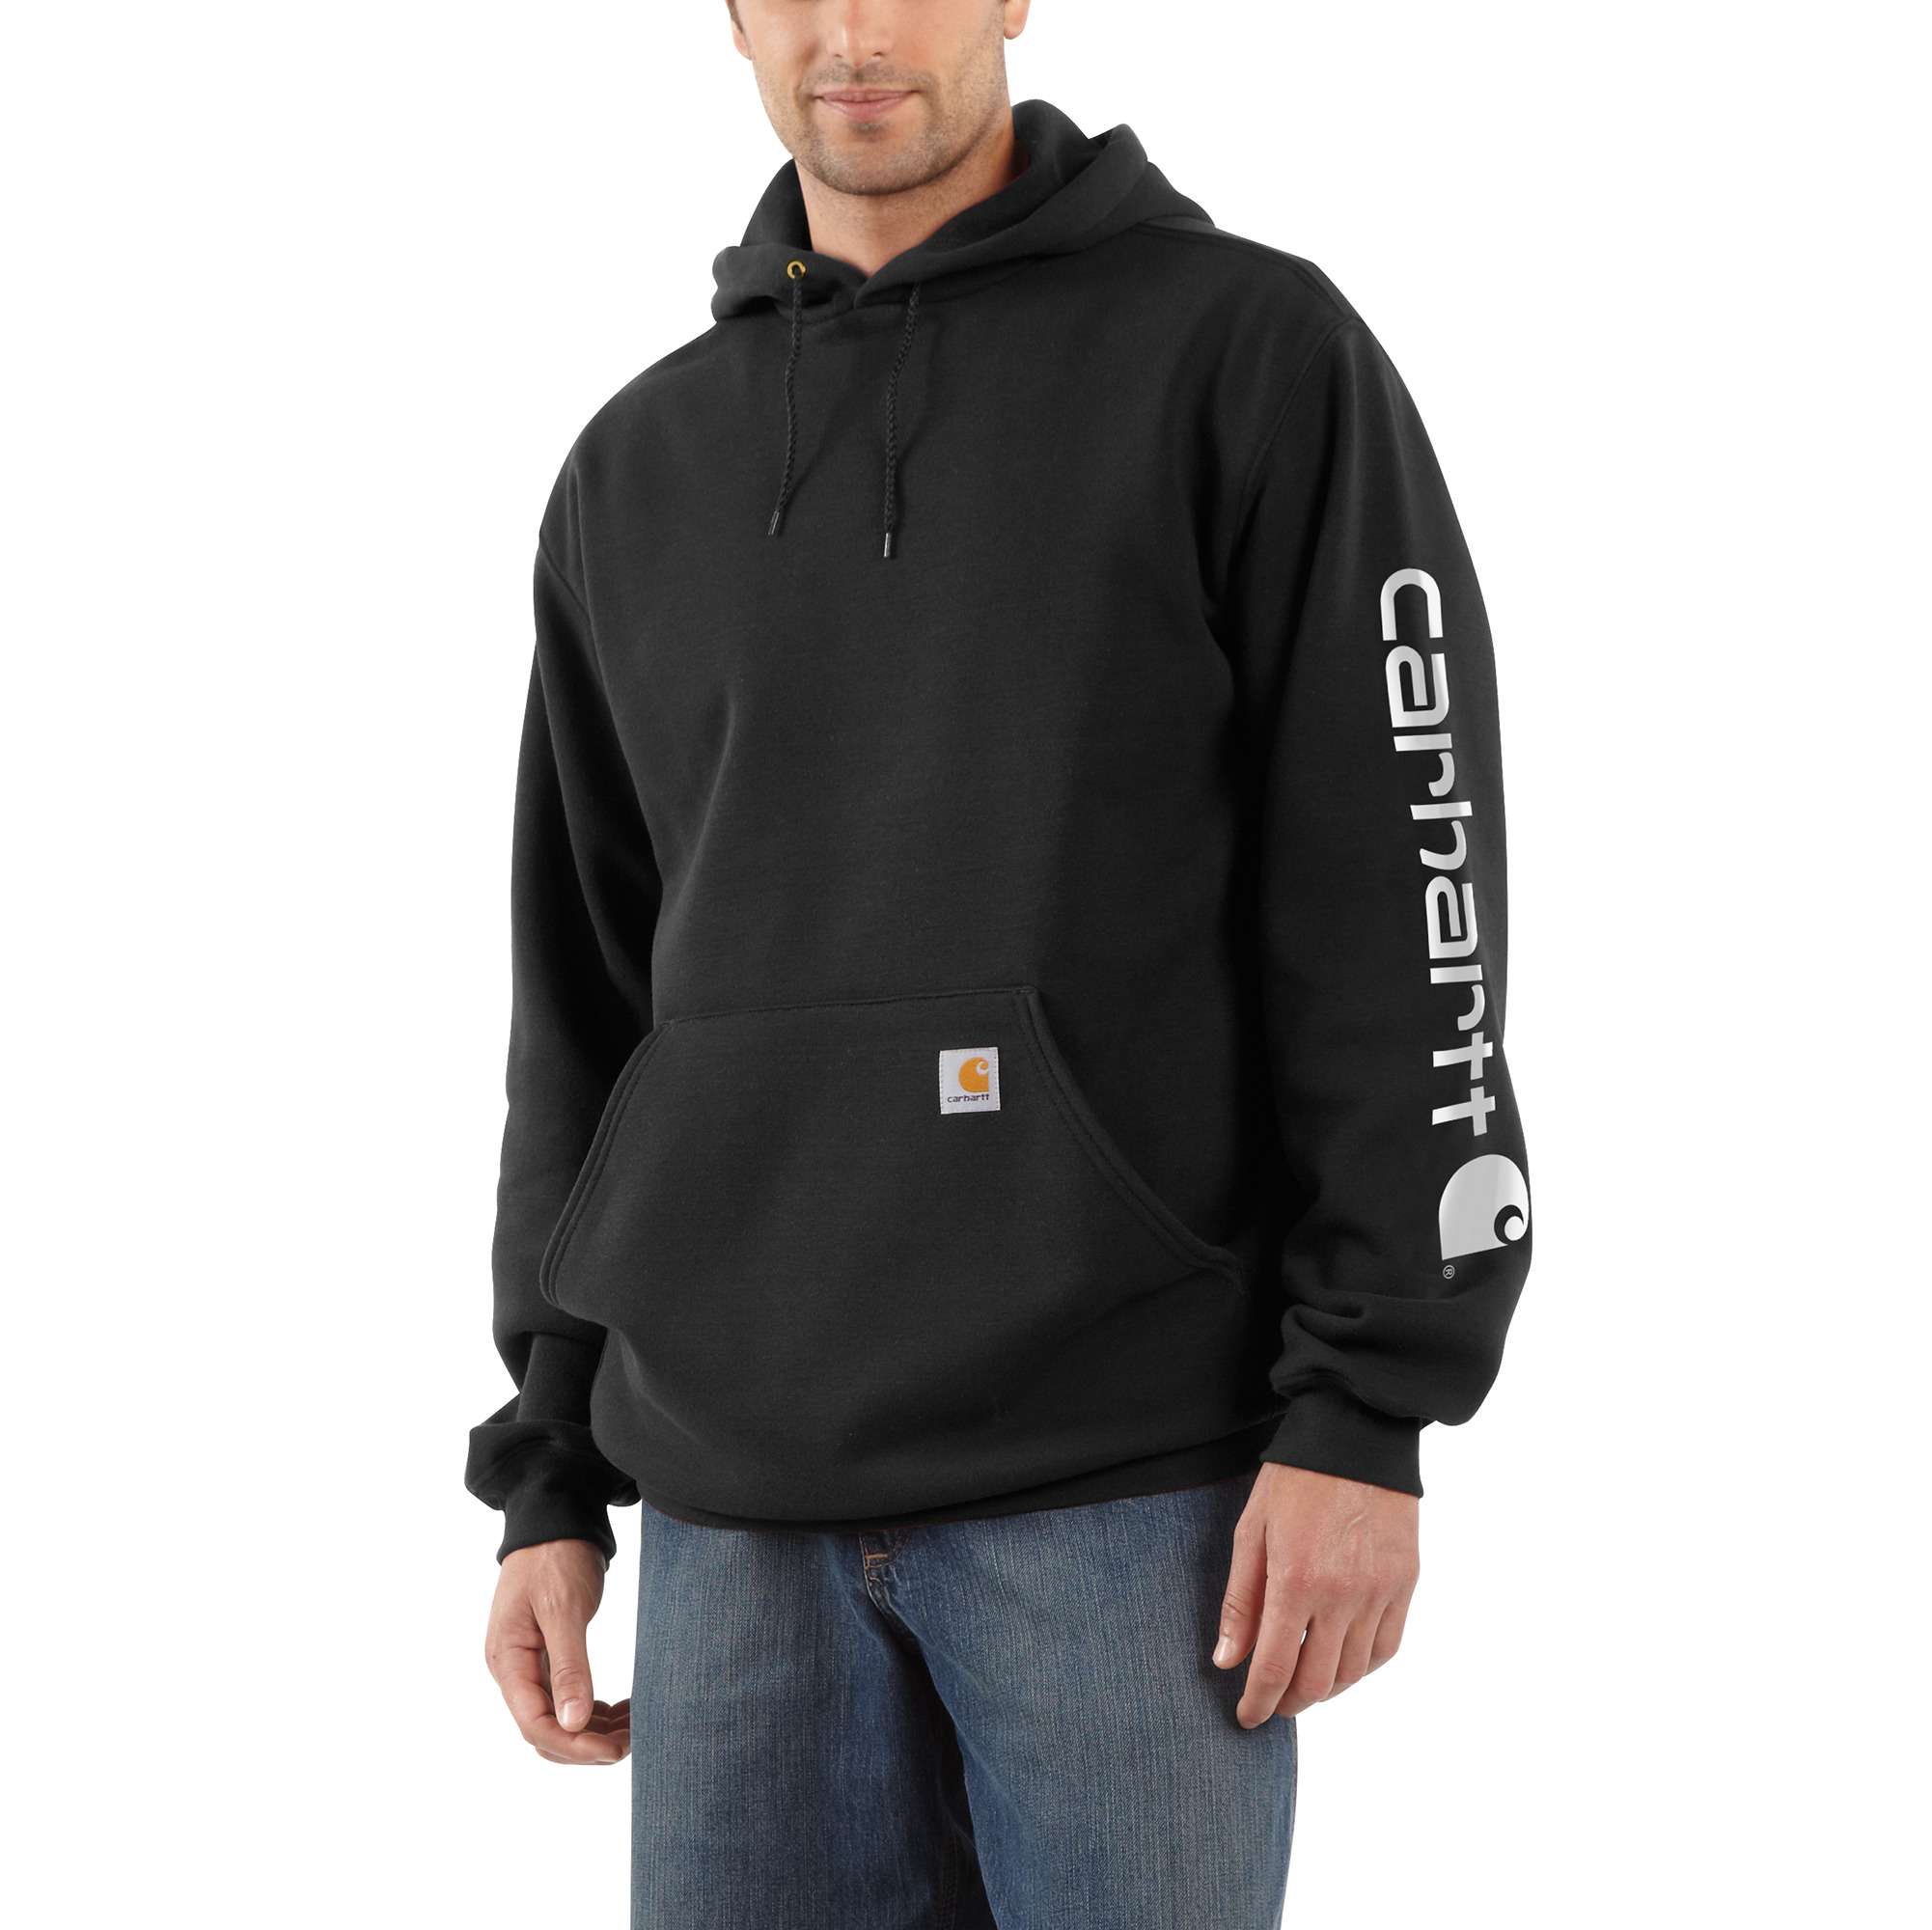 Carhartt Hoodie Clothing & Work Apparel at Lowes.com